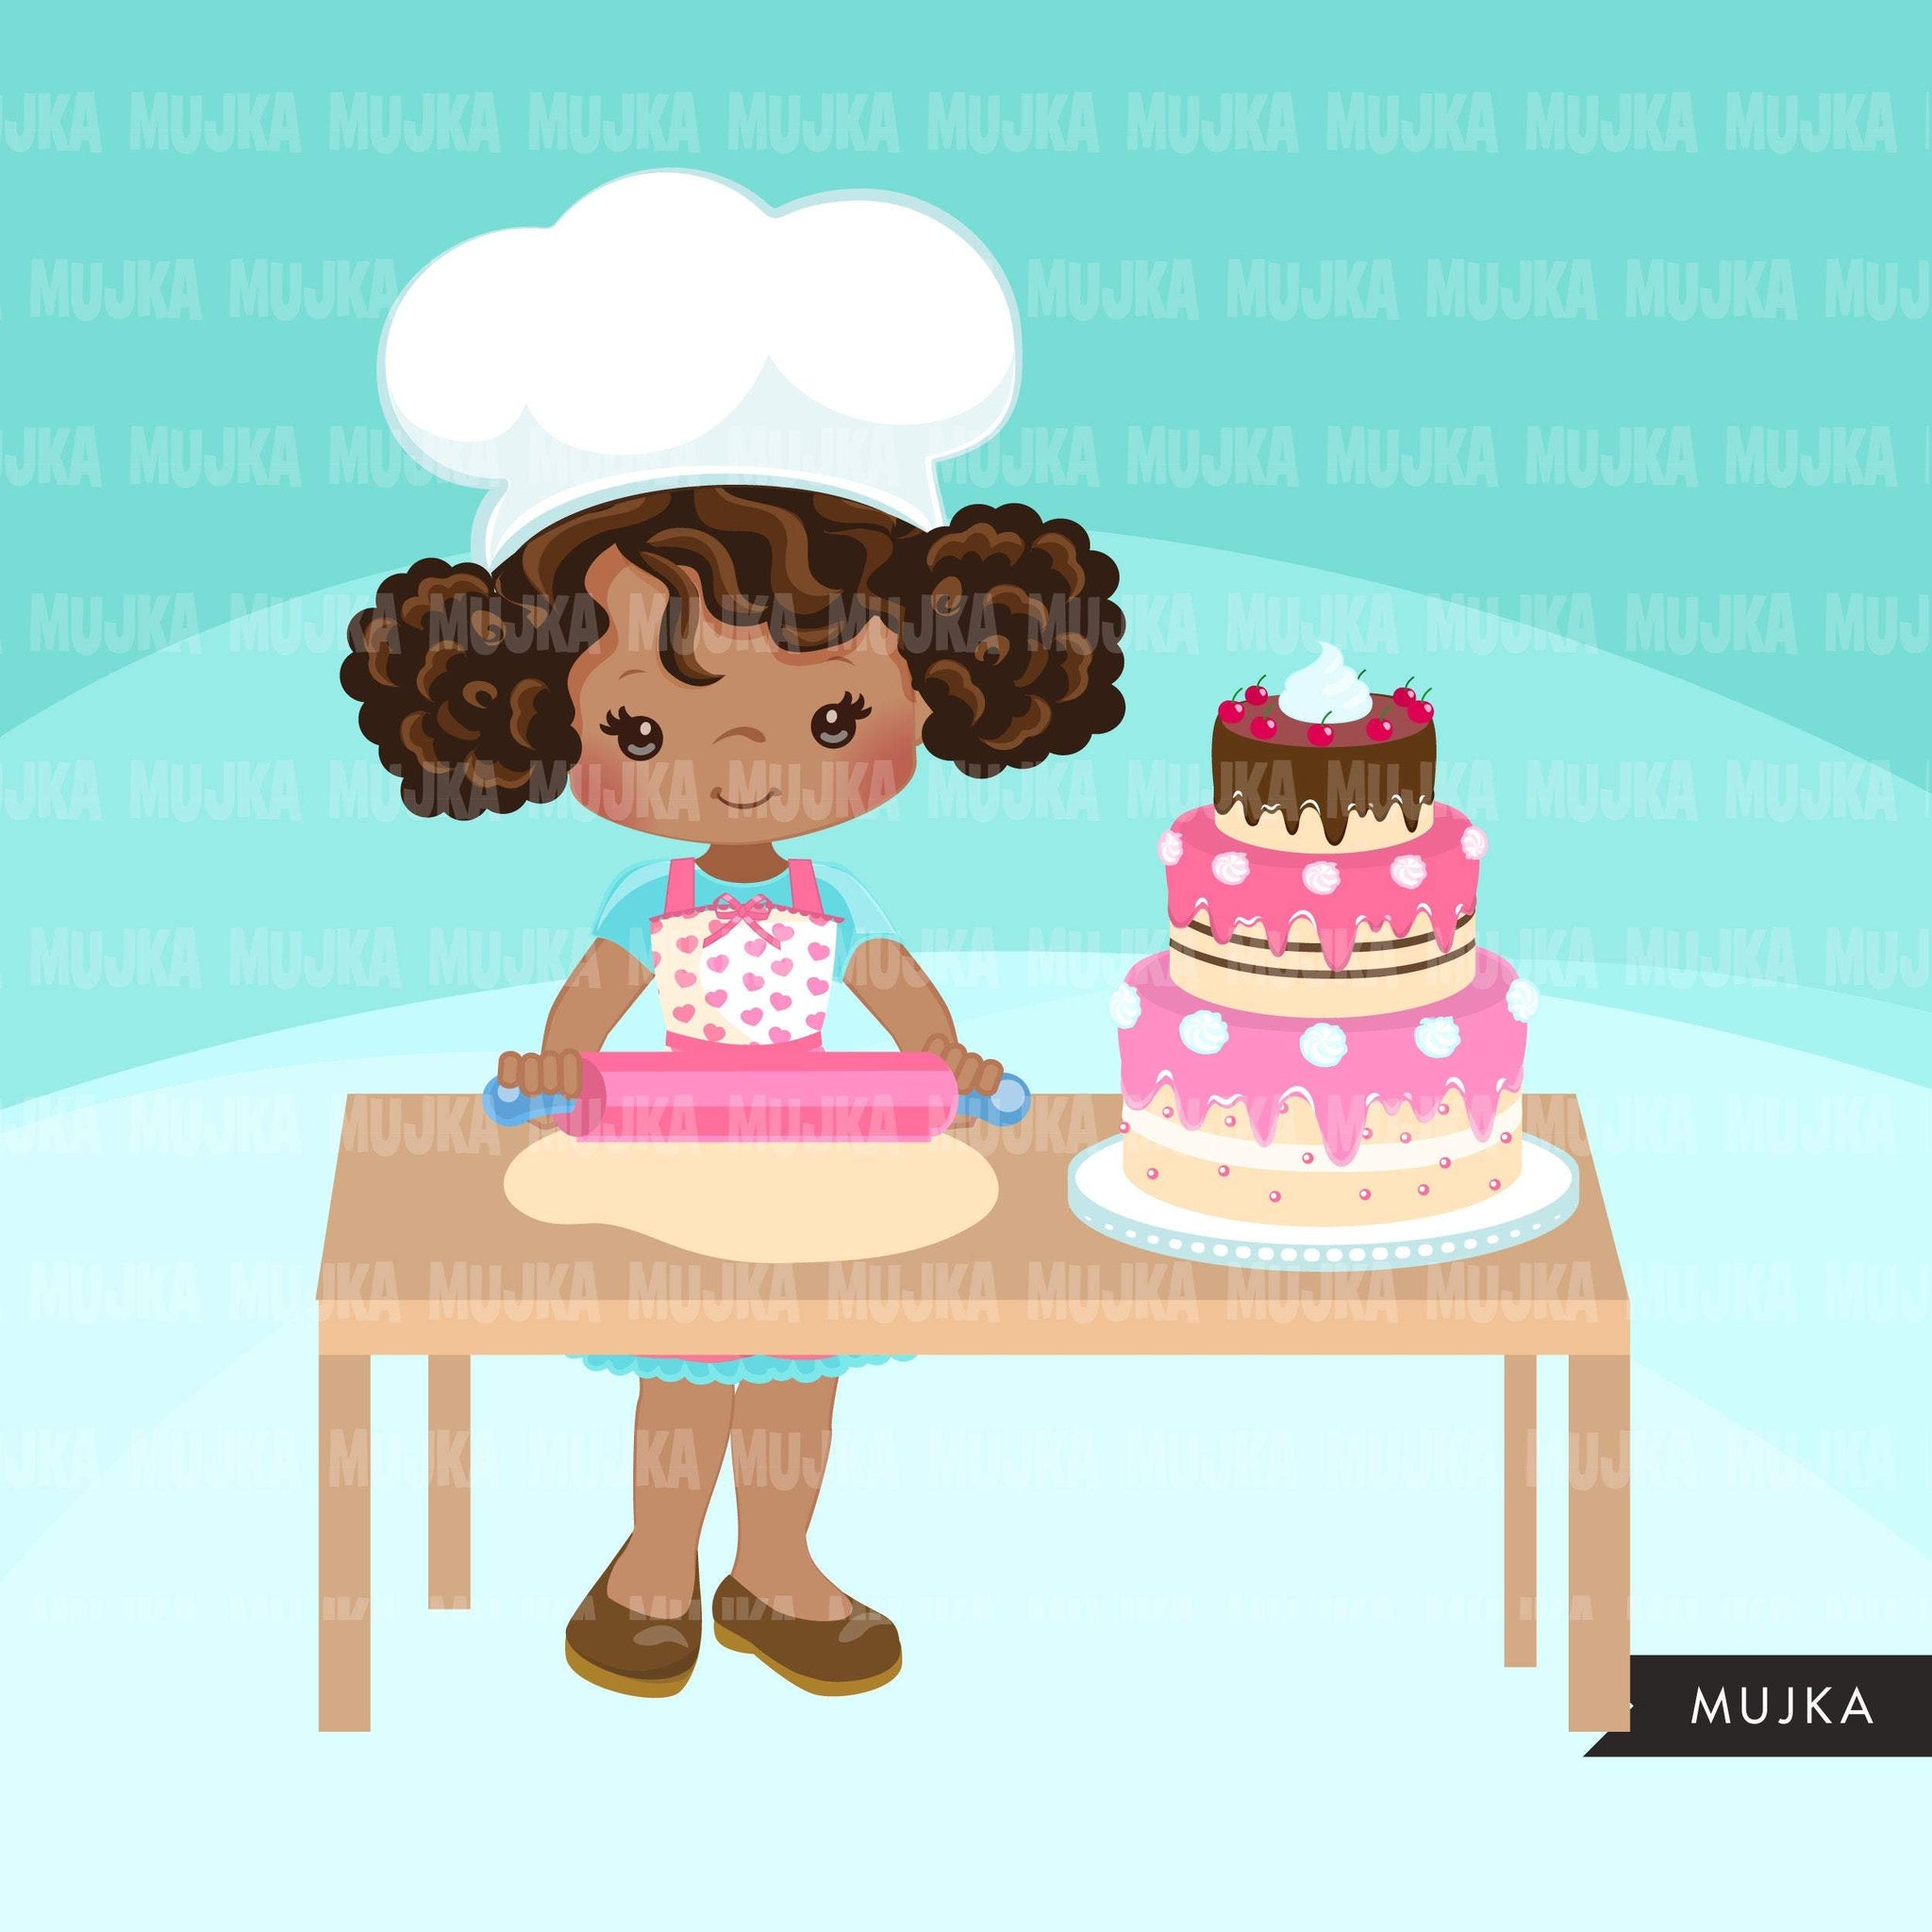 Japanese Anime-style Woman Of Baking Chocolate Cake. Royalty Free SVG,  Cliparts, Vectors, and Stock Illustration. Image 135788418.